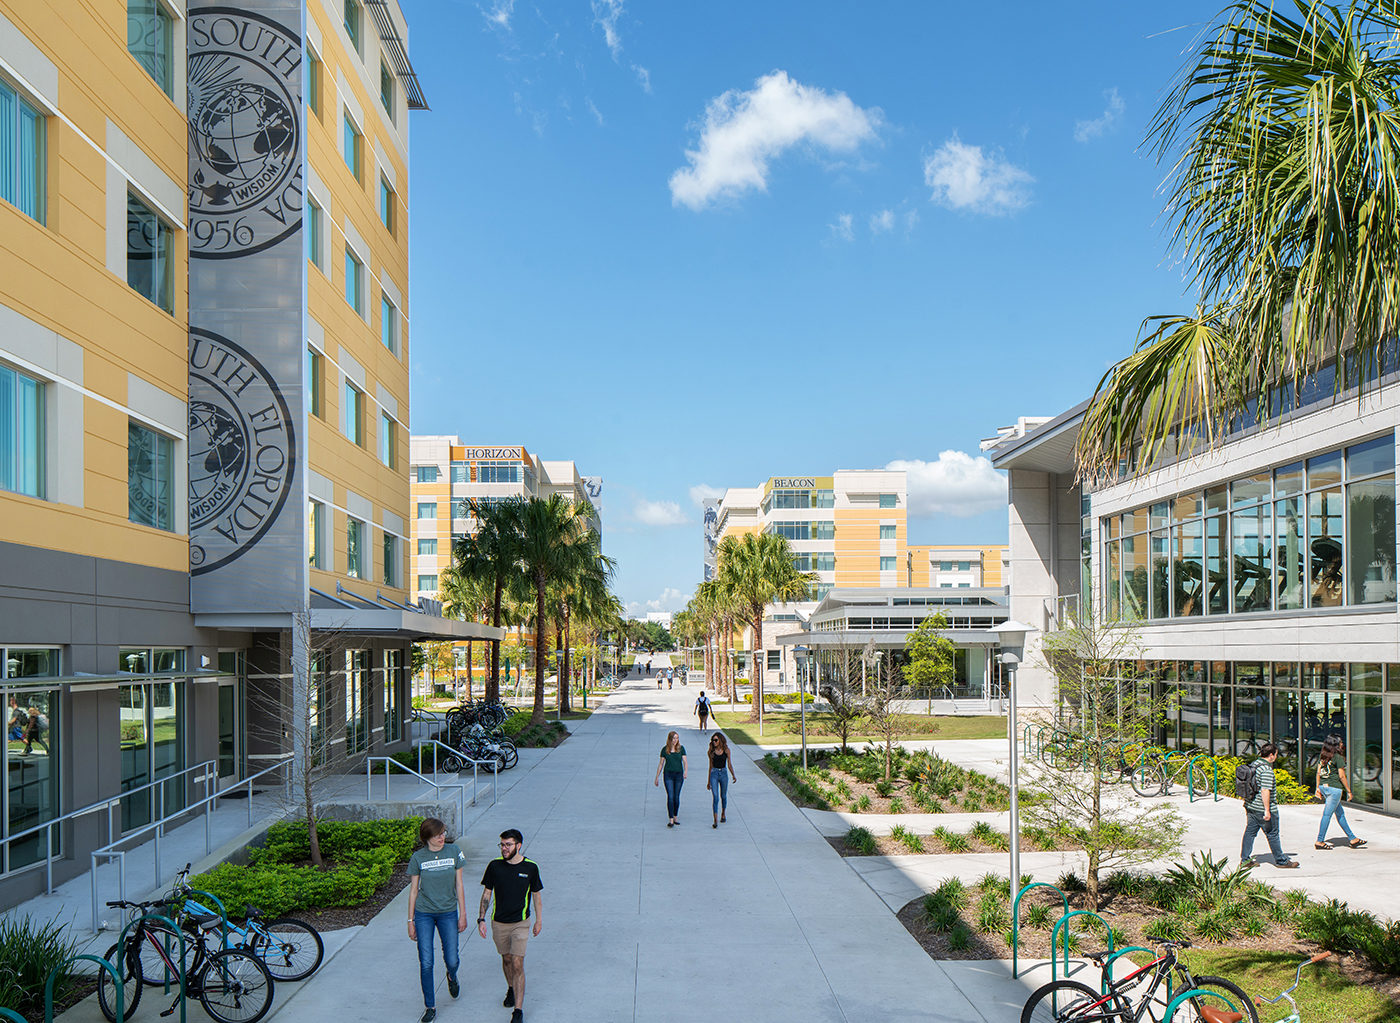 USF apartment-style dorms will not be available to first-time-in-college students